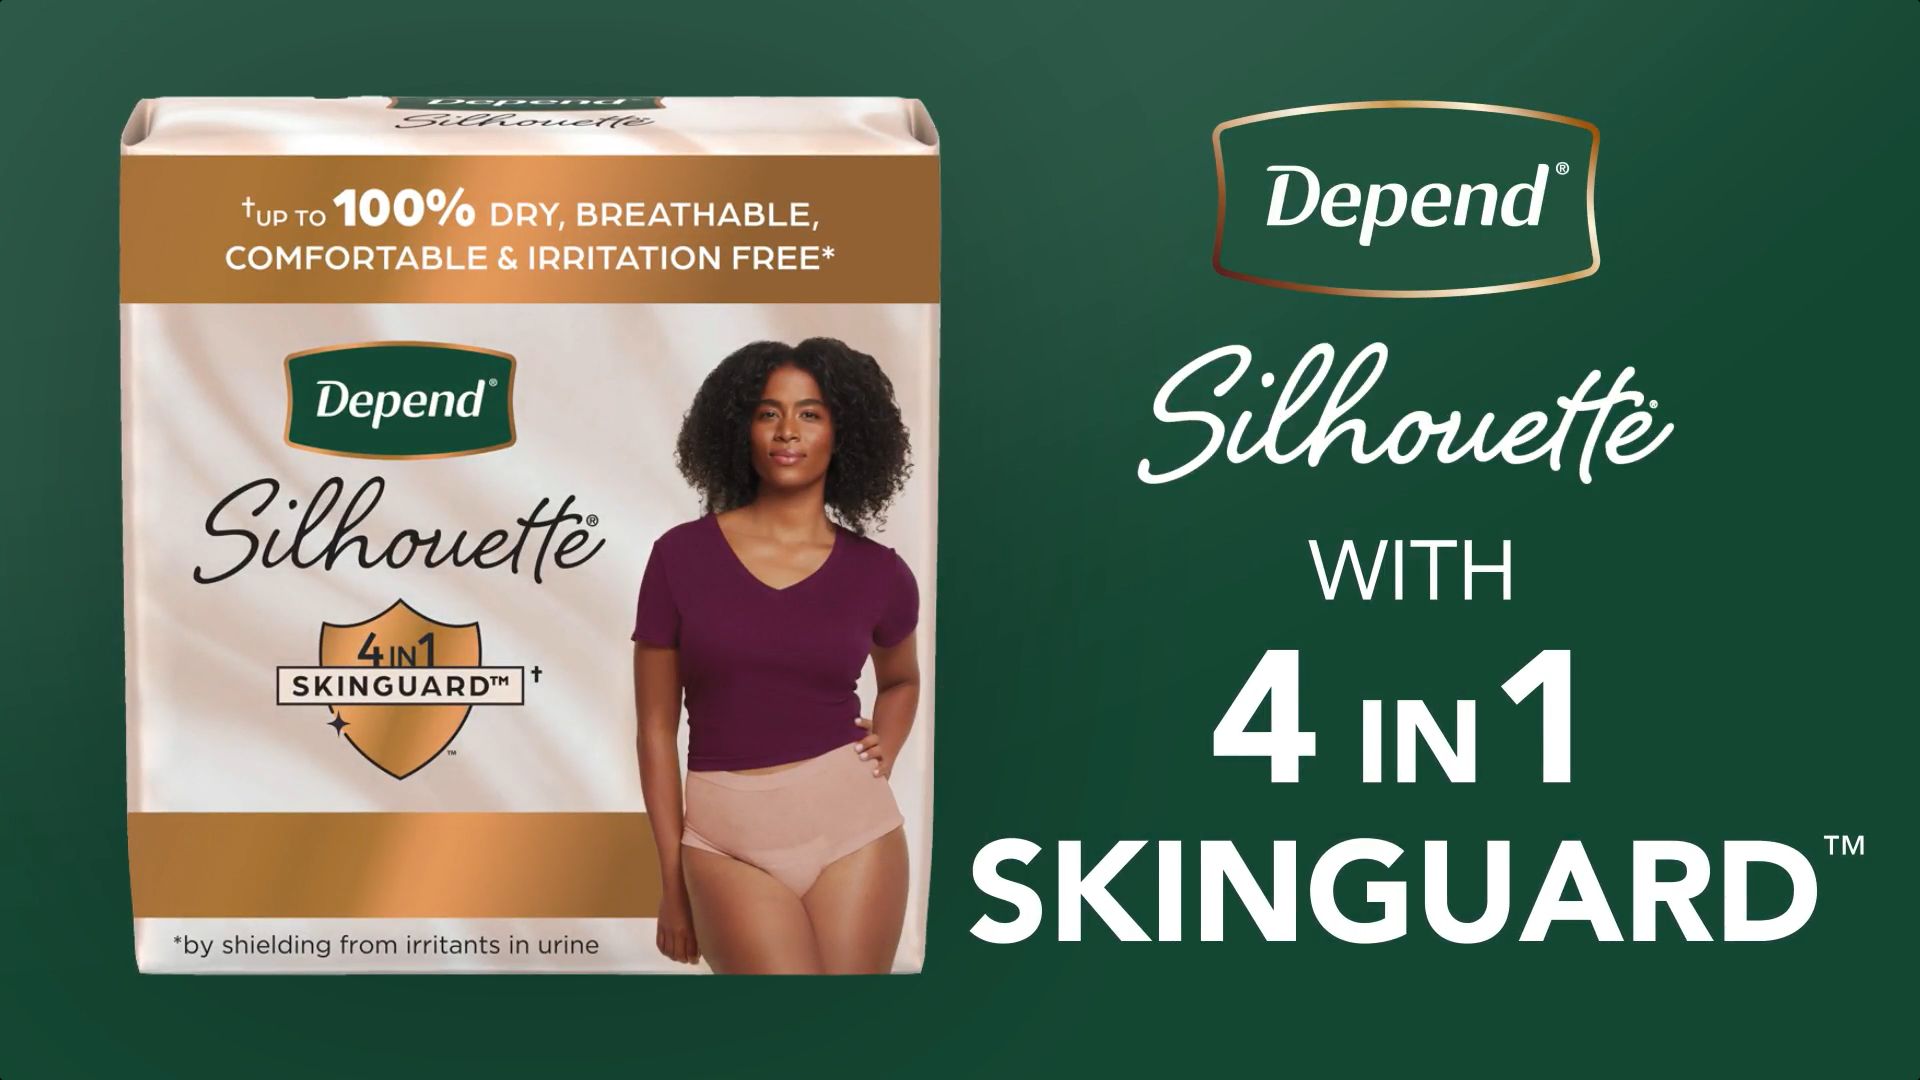  Depend Silhouette Adult Incontinence And Postpartum Underwear  For Women, Medium, Maximum Absorbency, Berry, 56 Count